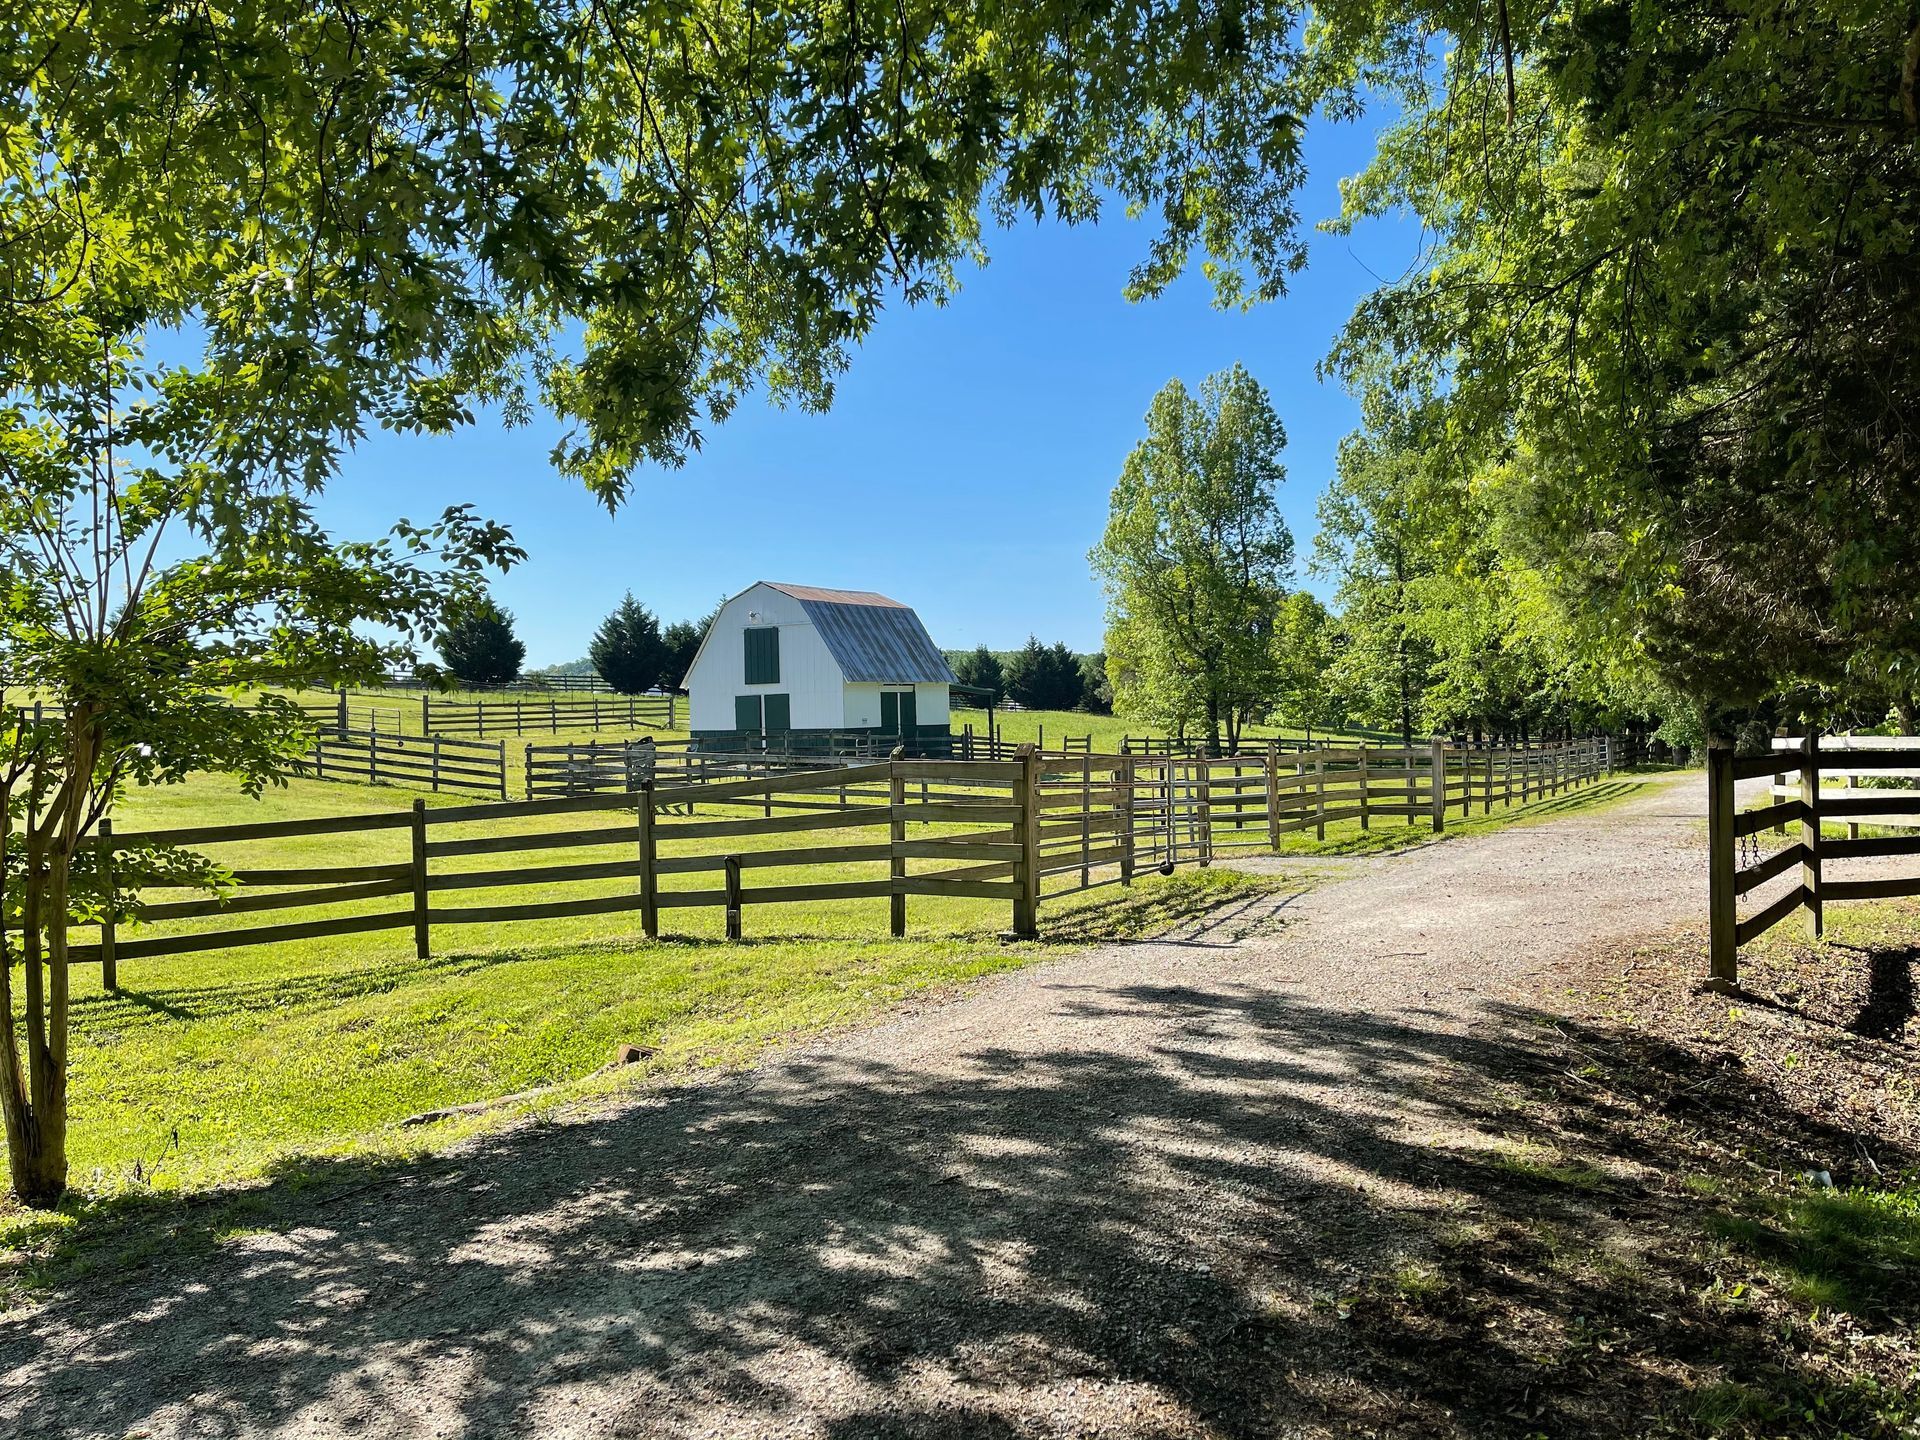 A white barn is surrounded by a wooden fence and a dirt road.